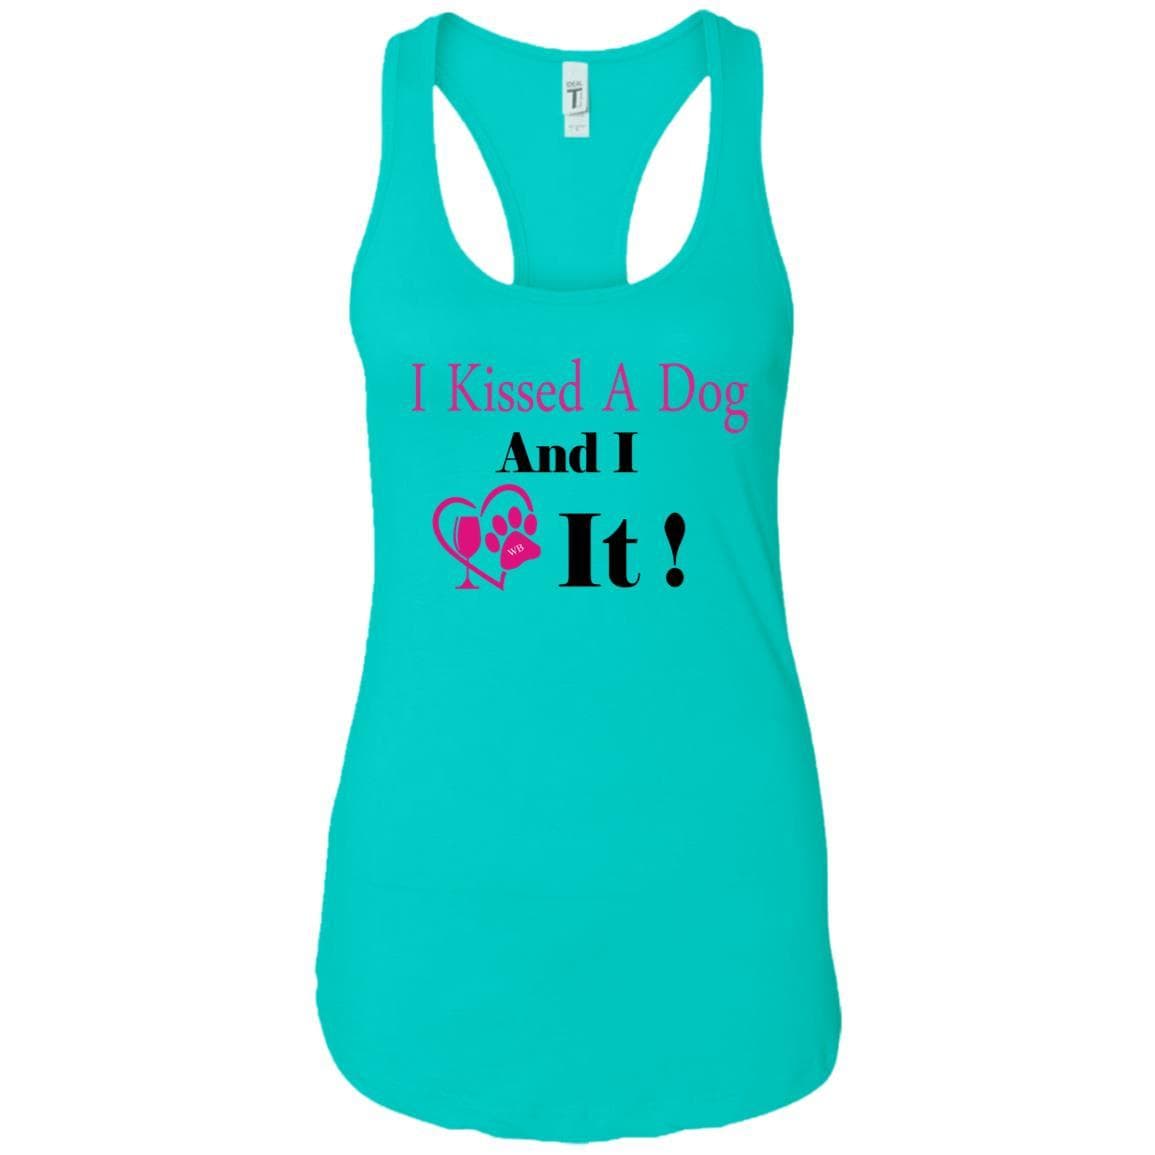 Tank Top Tahiti Blue / X-Small WineyBitches.co "I Kissed A Dog And I Loved It:" Ladies Ideal Racerback Tank WineyBitchesCo